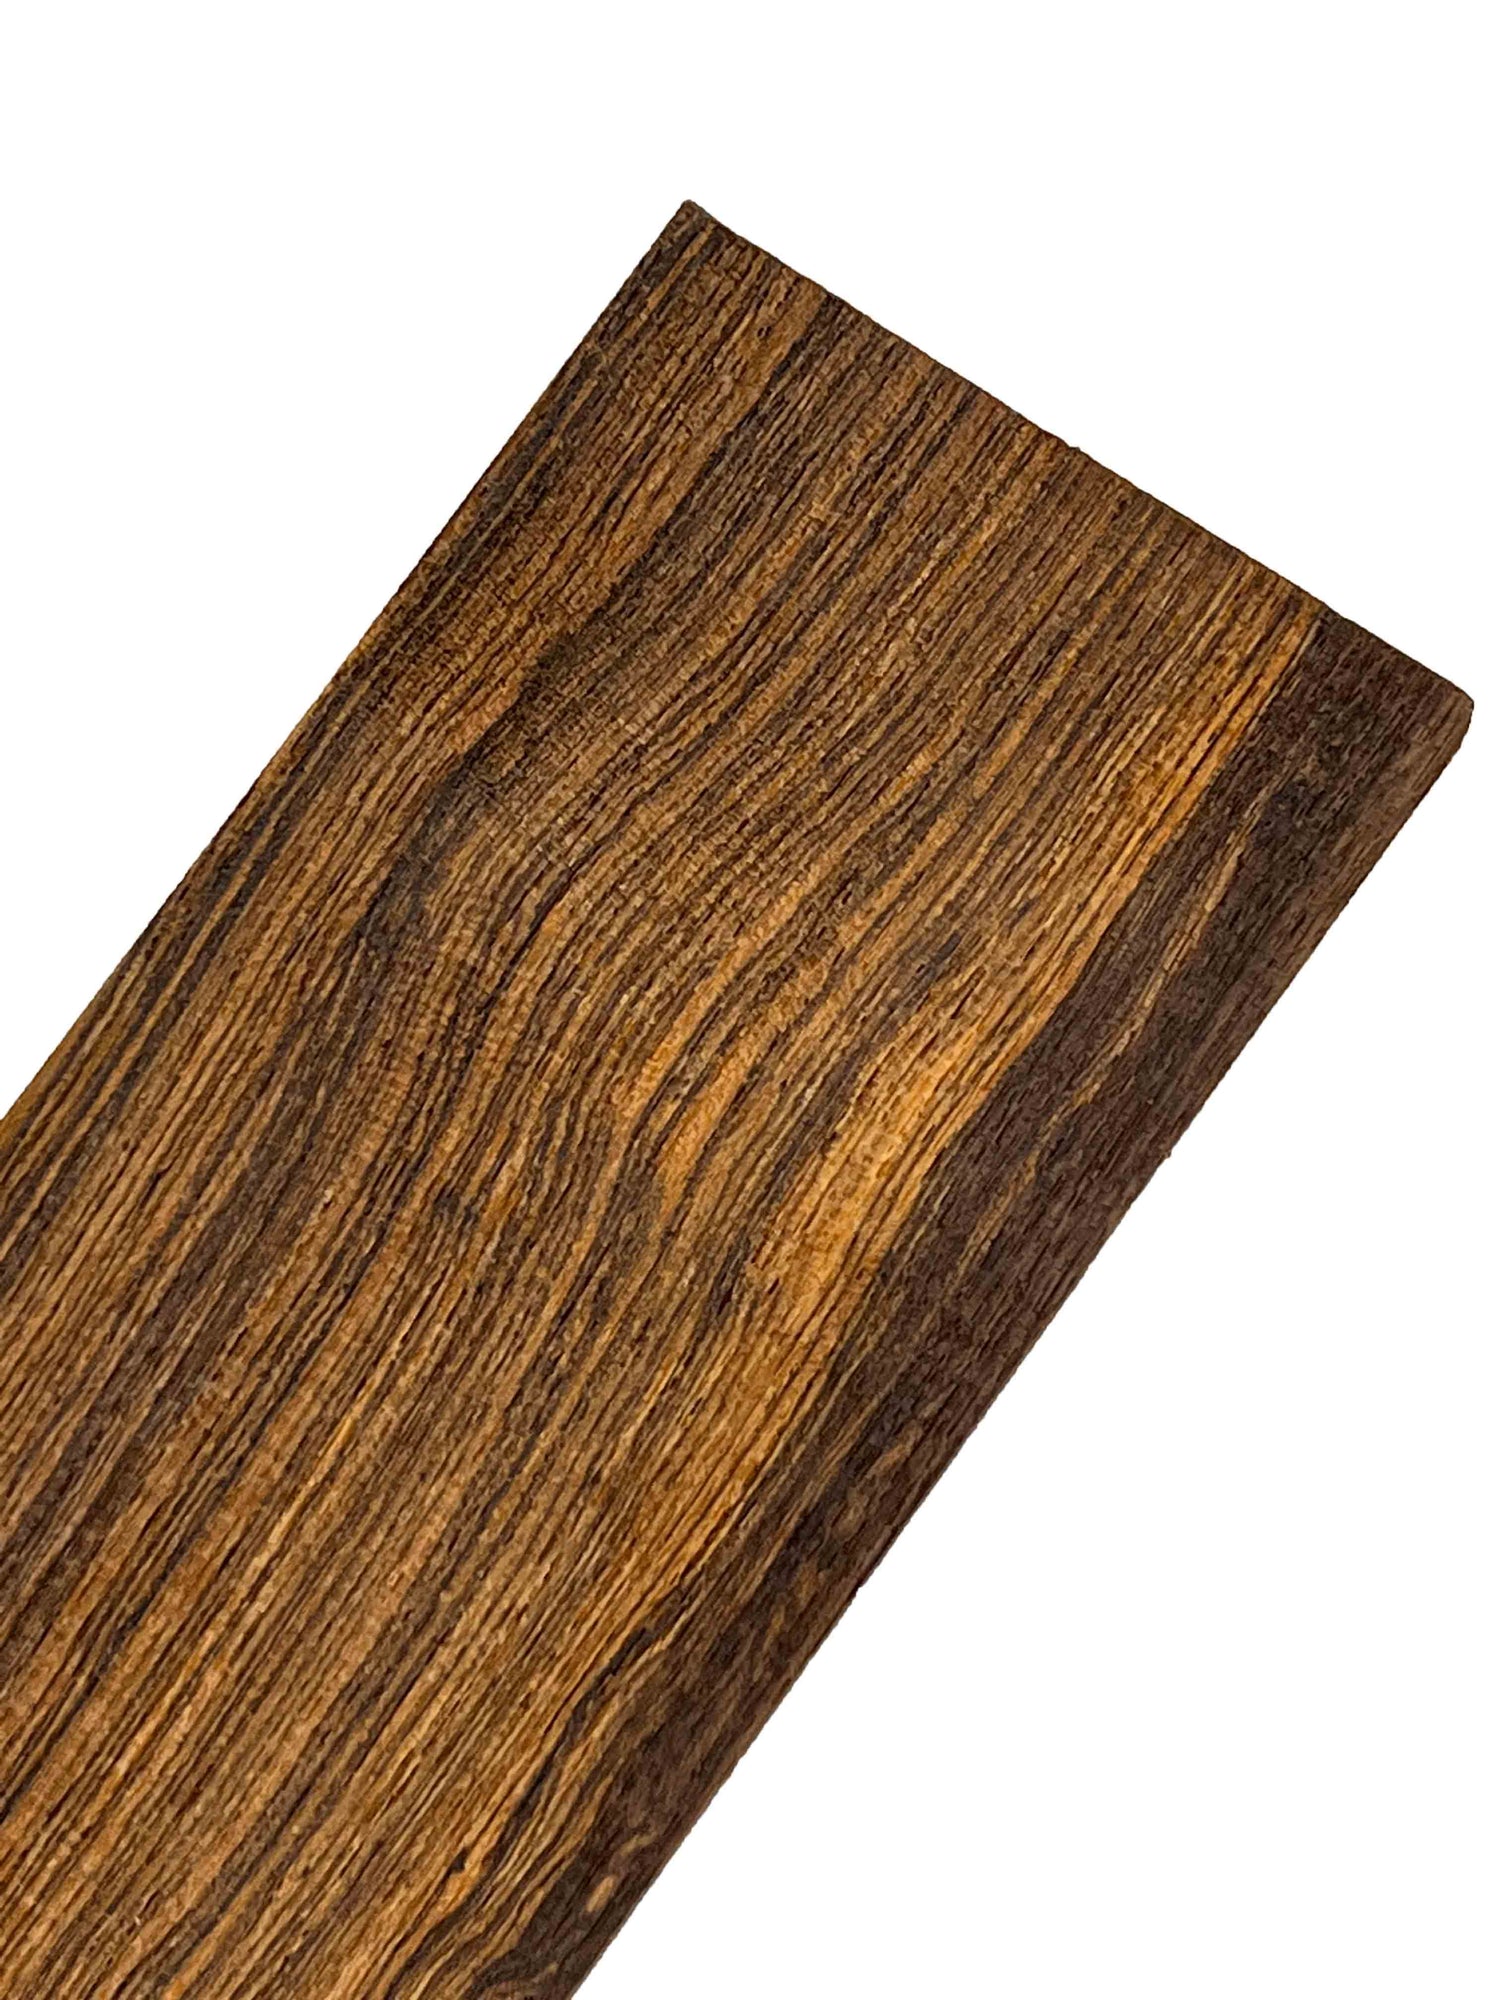 Bocote Thin Stock Lumber Boards Wood Crafts - Exotic Wood Zone - Buy online Across USA 